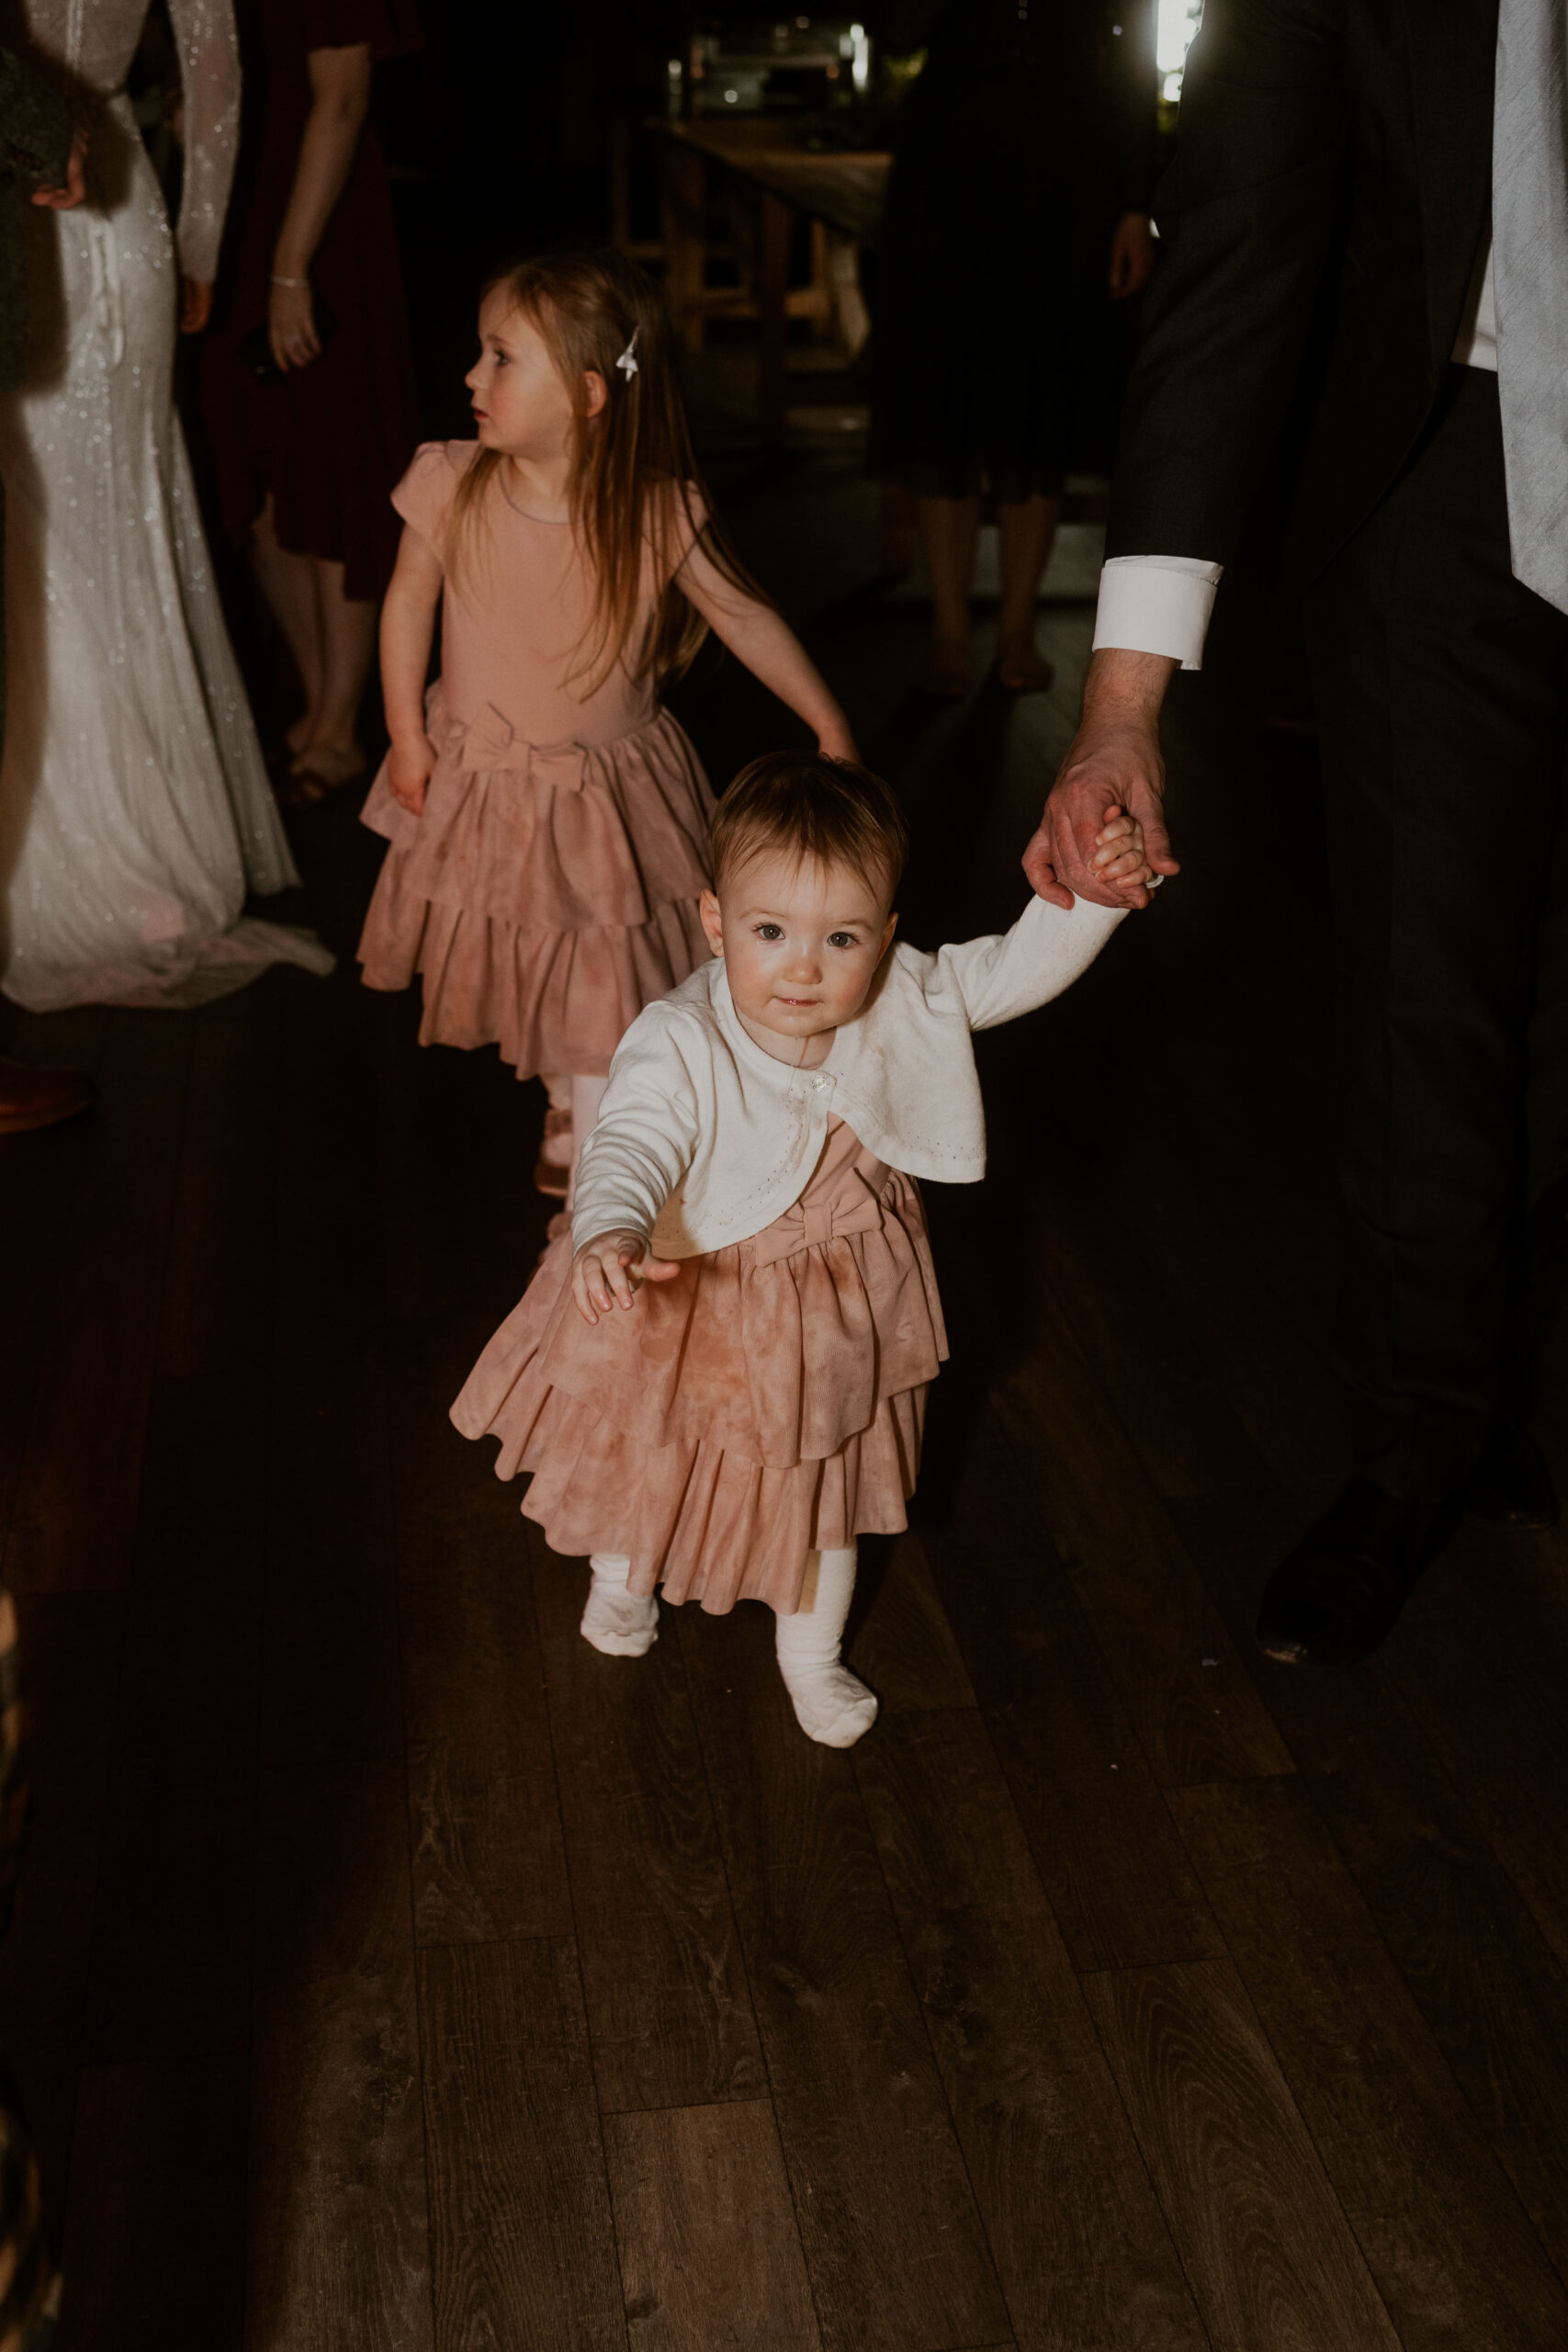 couples first dance at foxtail barn wedding photographer Yorkshire